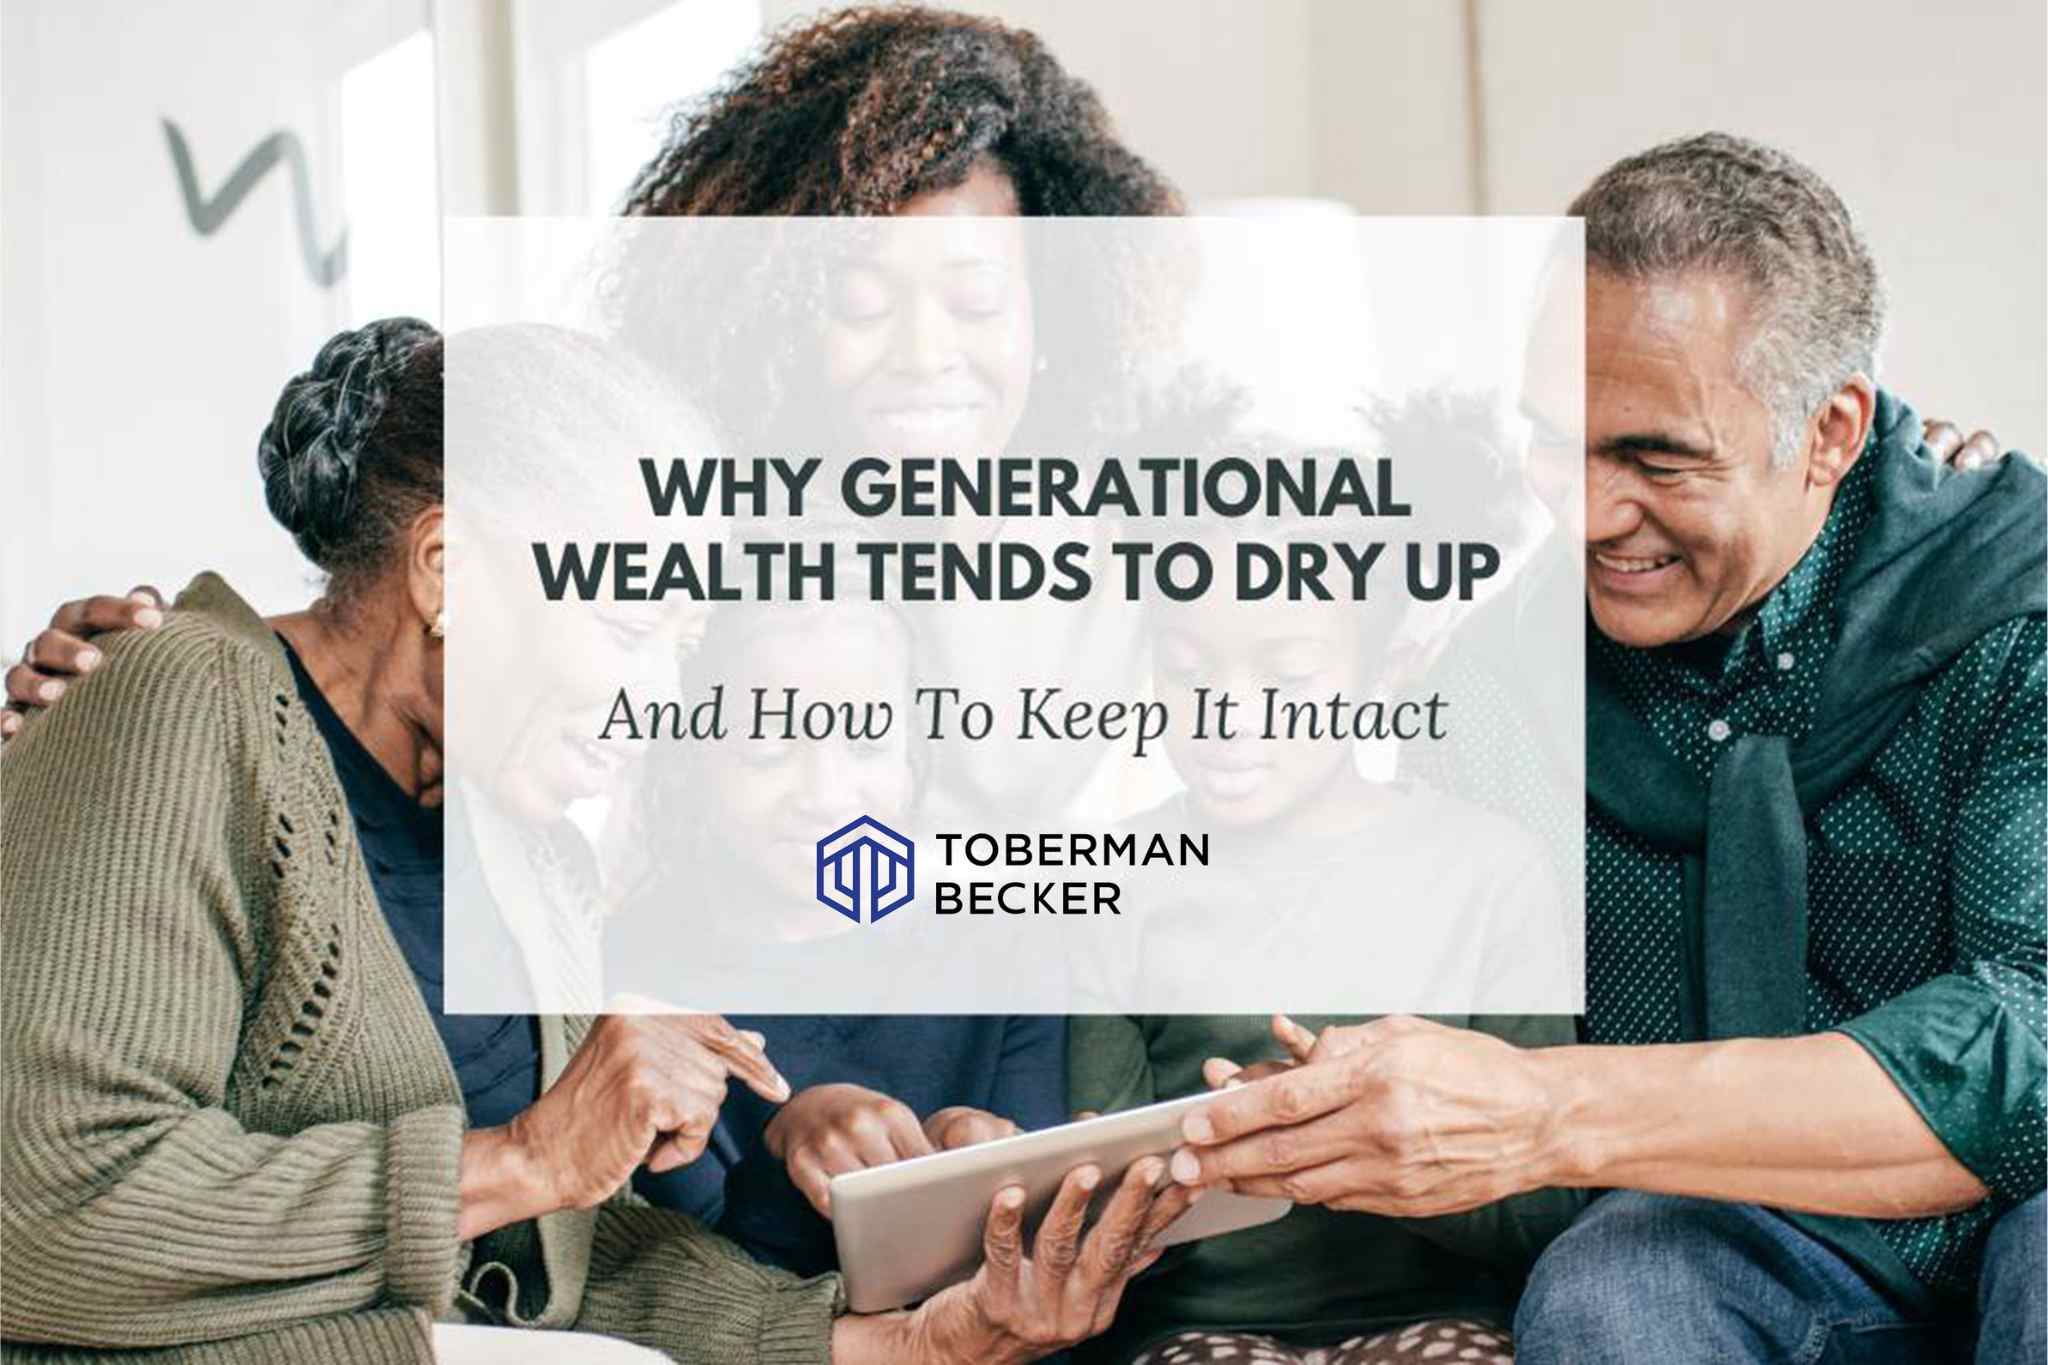 Why Generational Wealth Tends To Dry Up